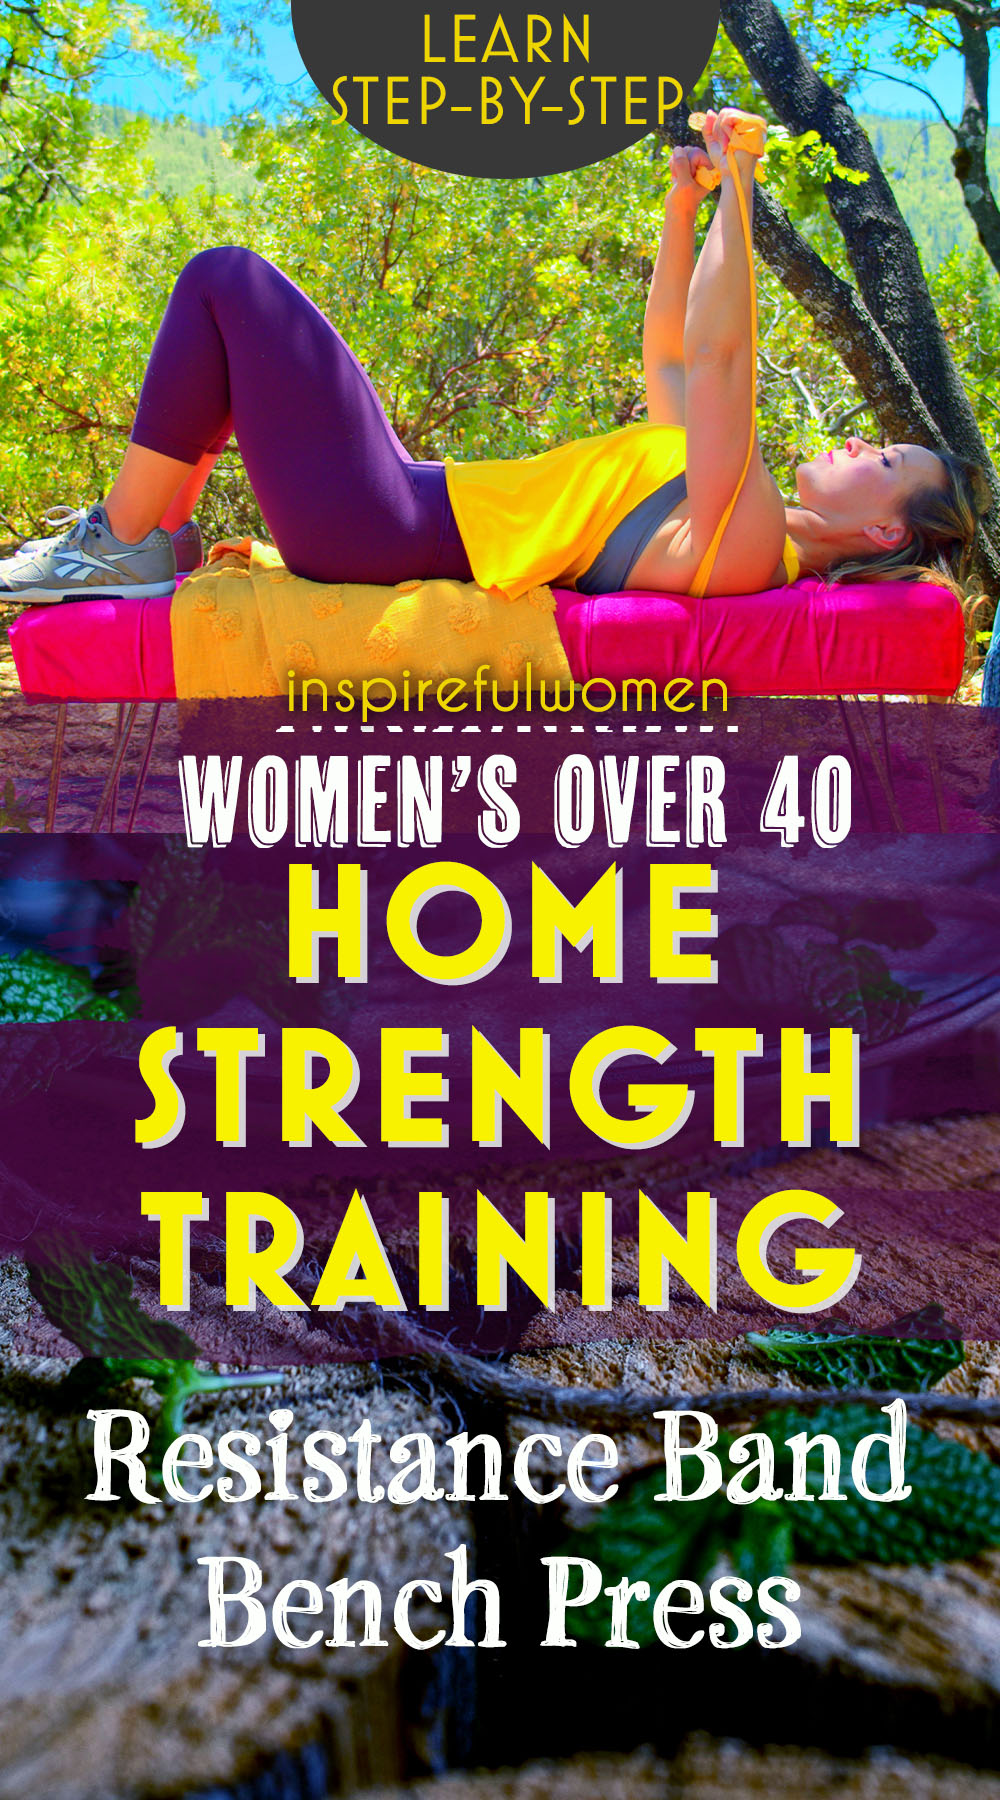 band-bench-press-at-home-pectoralis-major-chest-resistance-training-women-40-plus